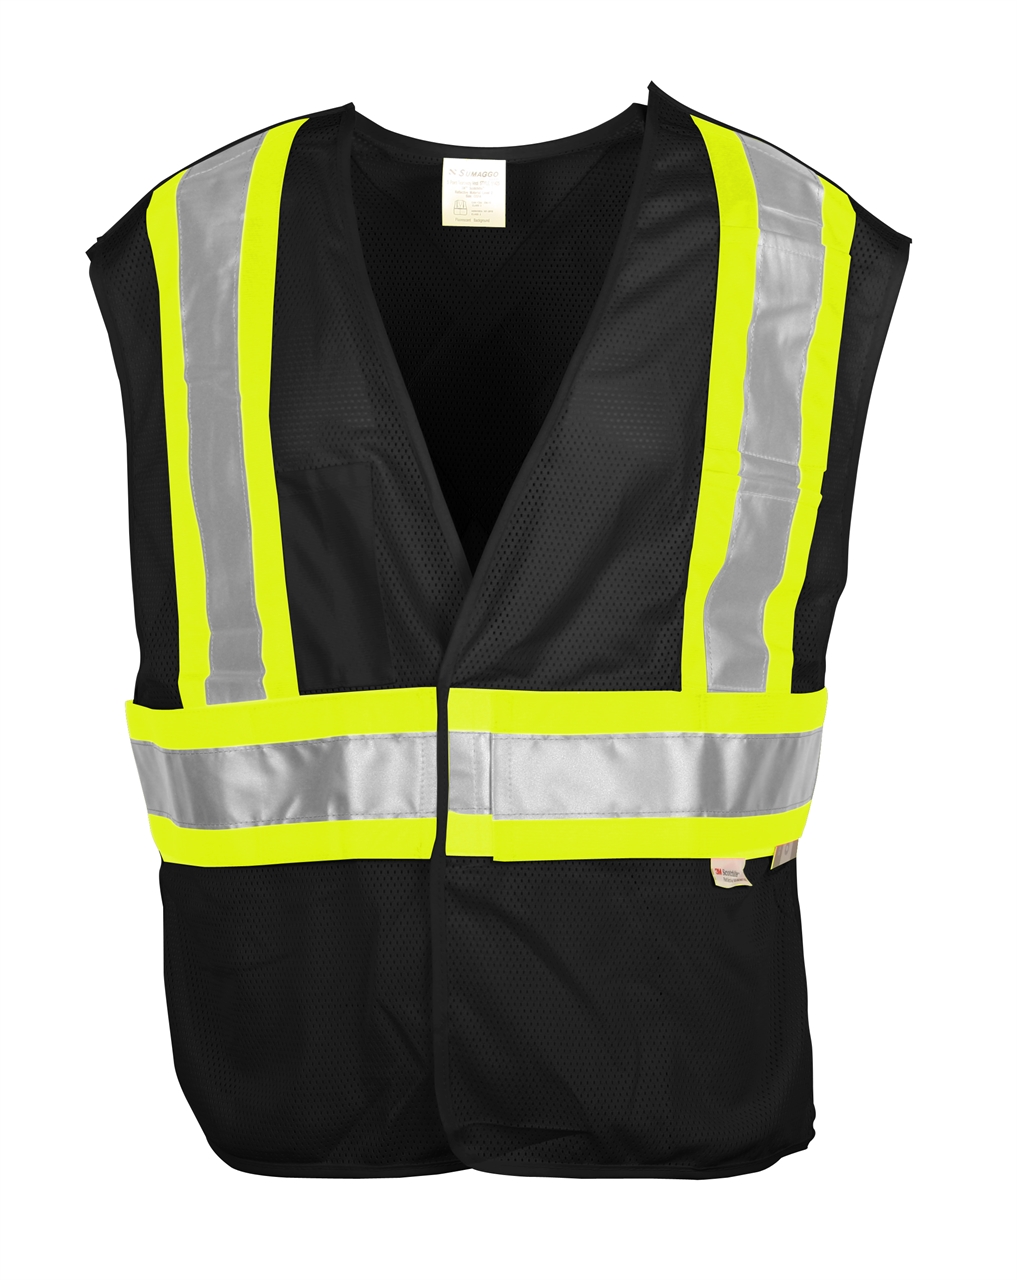 Picture of Sumaggo Tearaway Mesh Vest W/ High Visibility Contrast Material